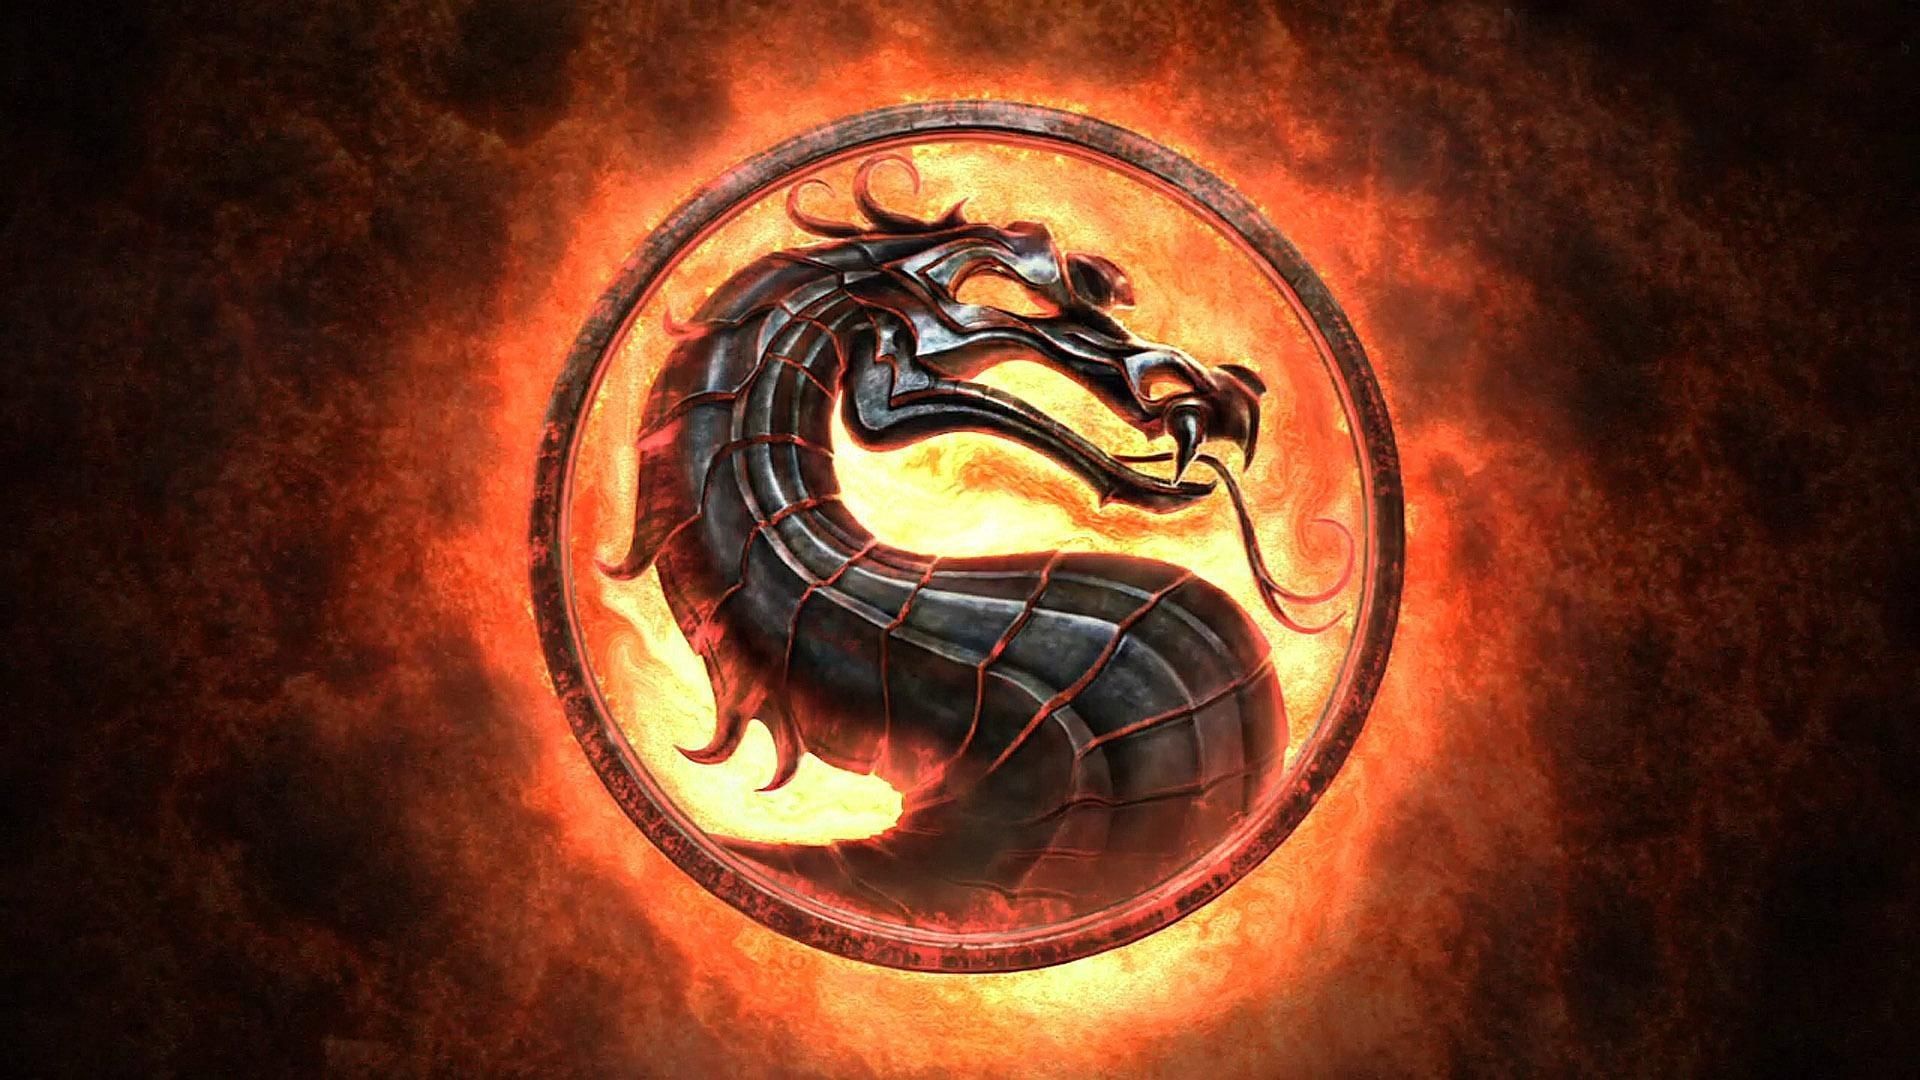 Mortal Kombat Reboot: The Film Won't Have A Or Release Date Until Theaters Reopen